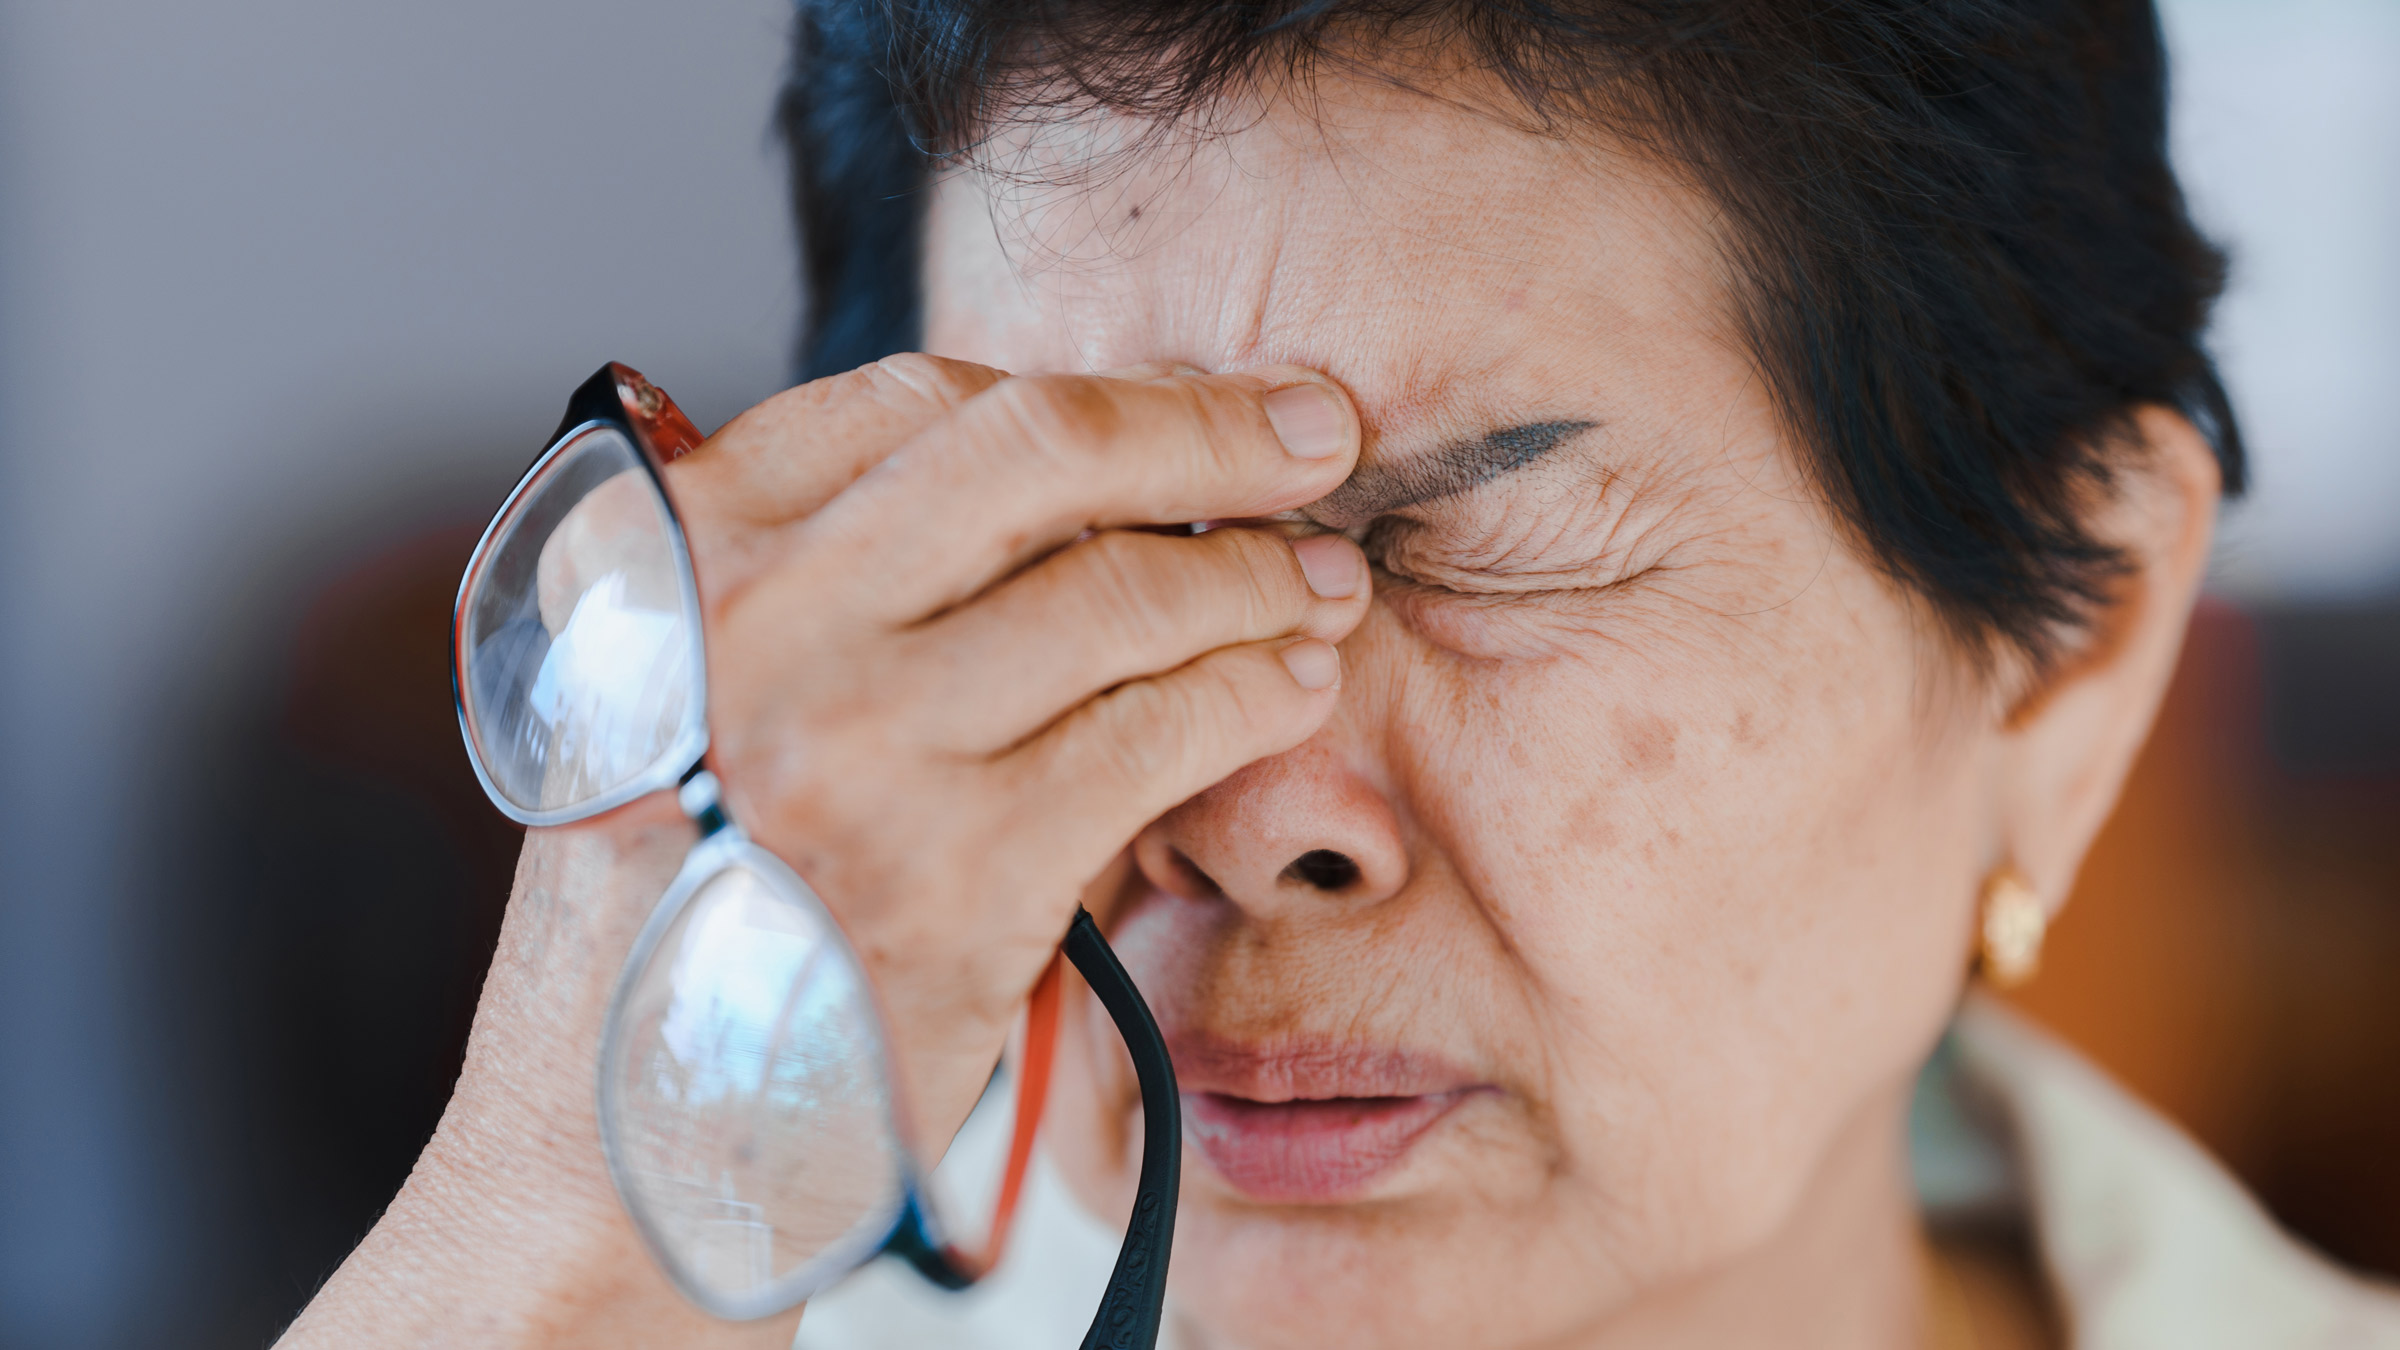 How Does COVID-19 Affect Your Eyes? Pain, Infections, and More - GoodRx